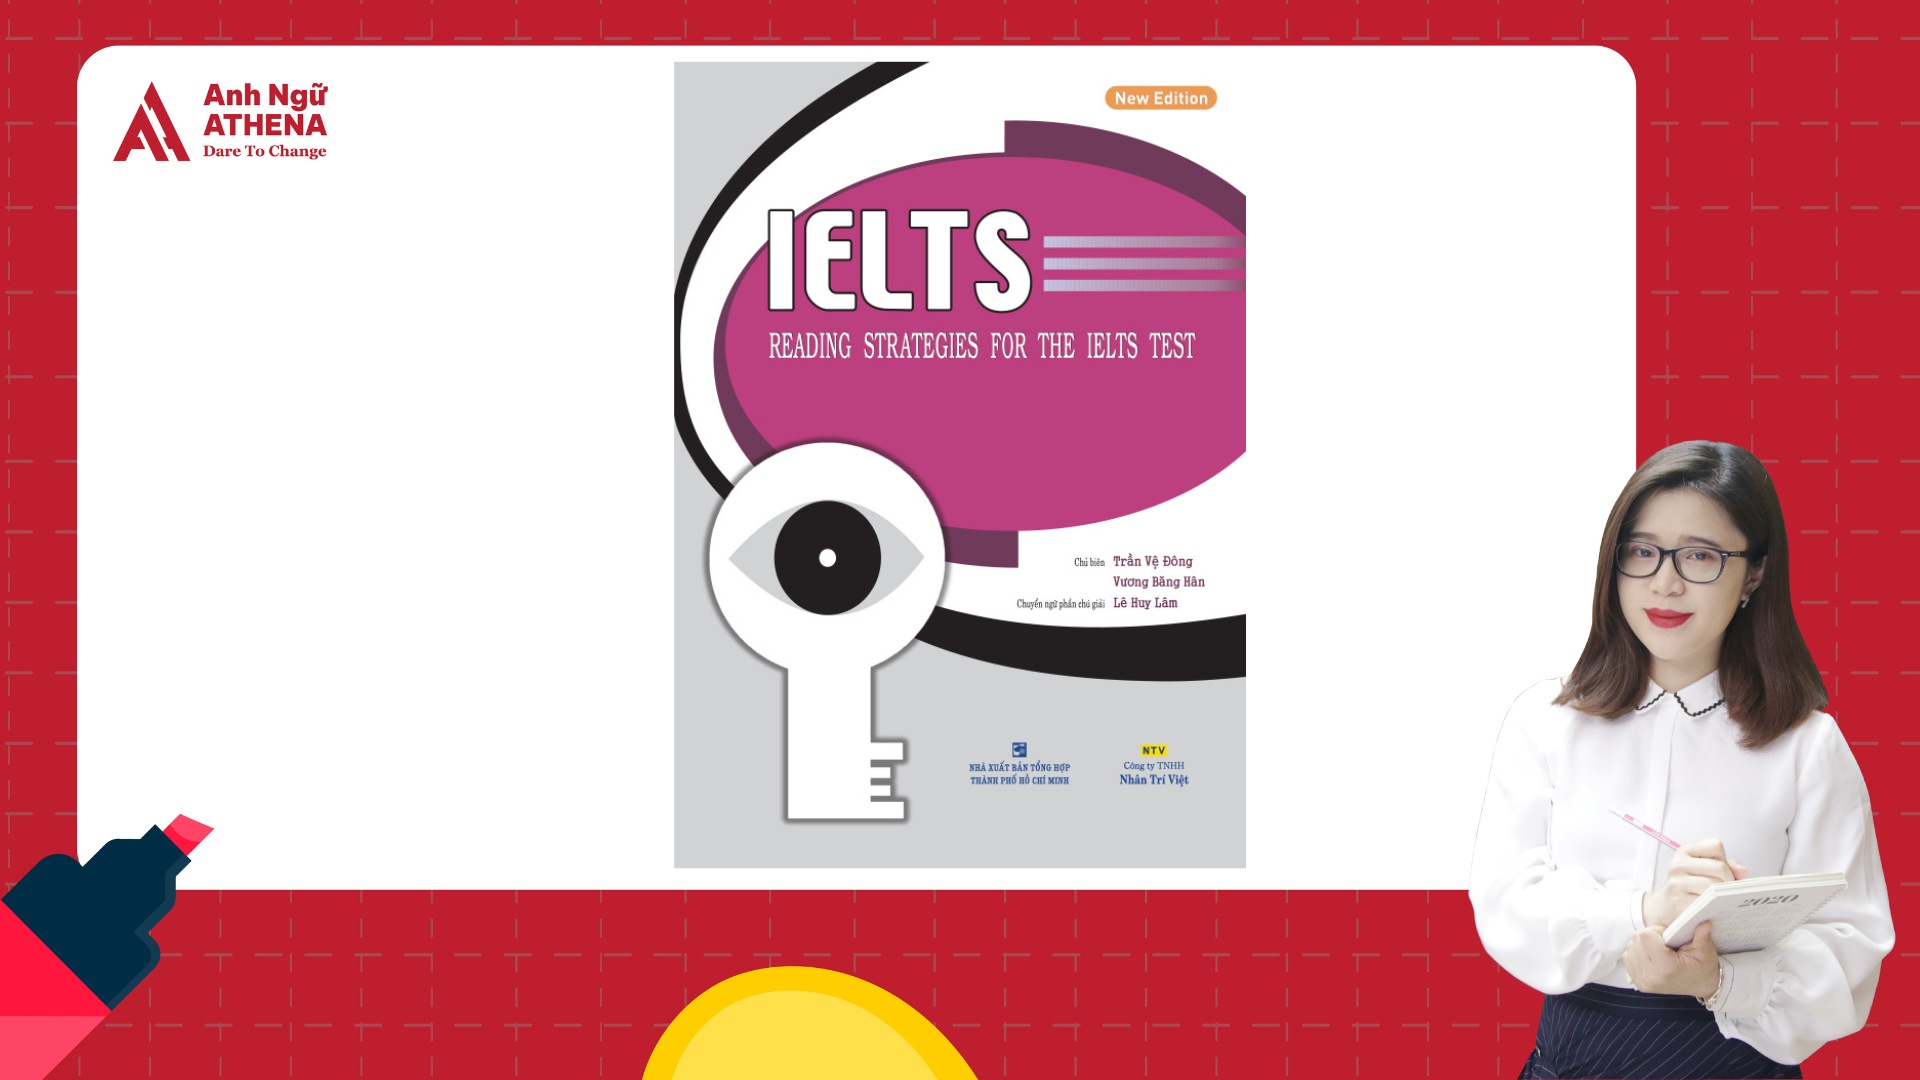 Reading Strategies For The IELTS Test